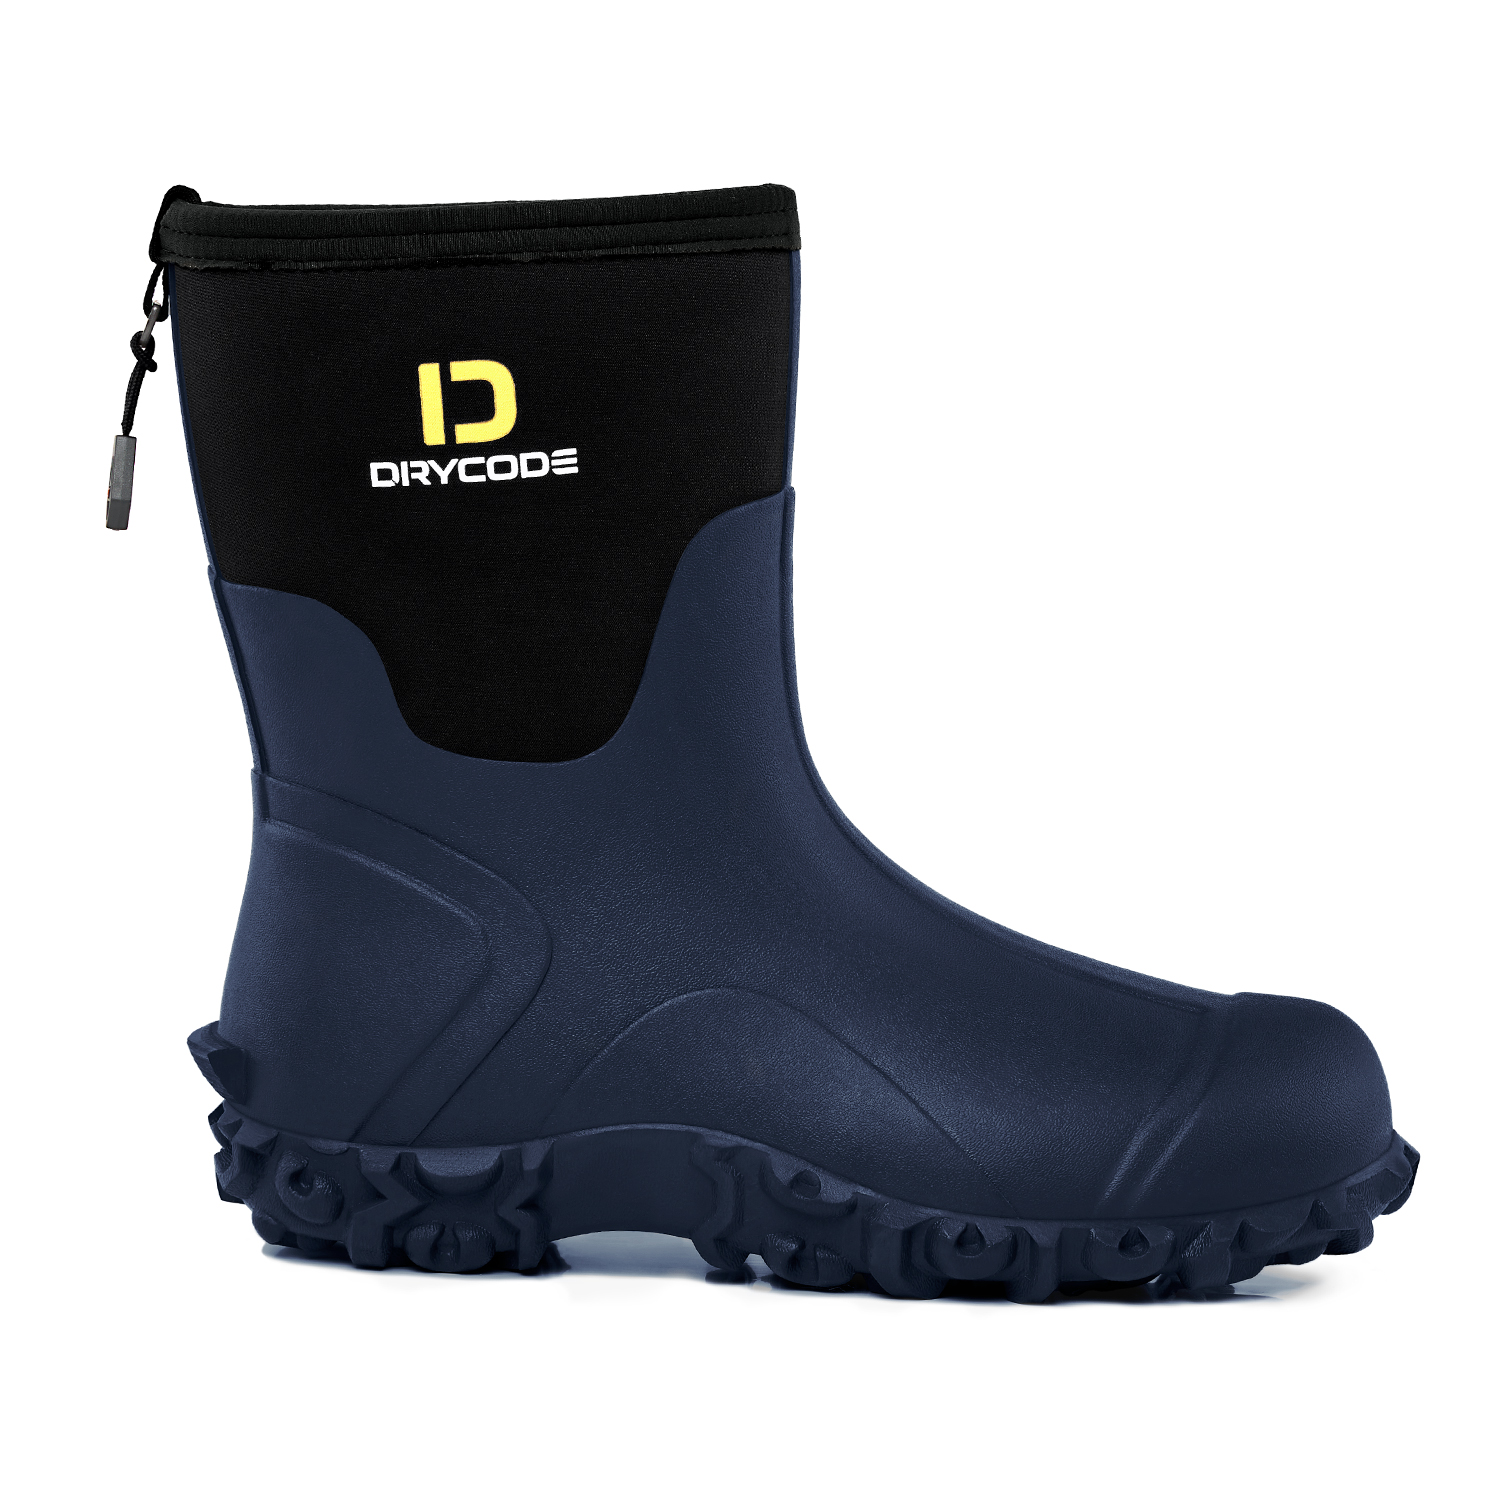 DRYCODE Waterproof Rubber Boots for Men (Blue) with Steel Shank, Mid Calf Rain Boots